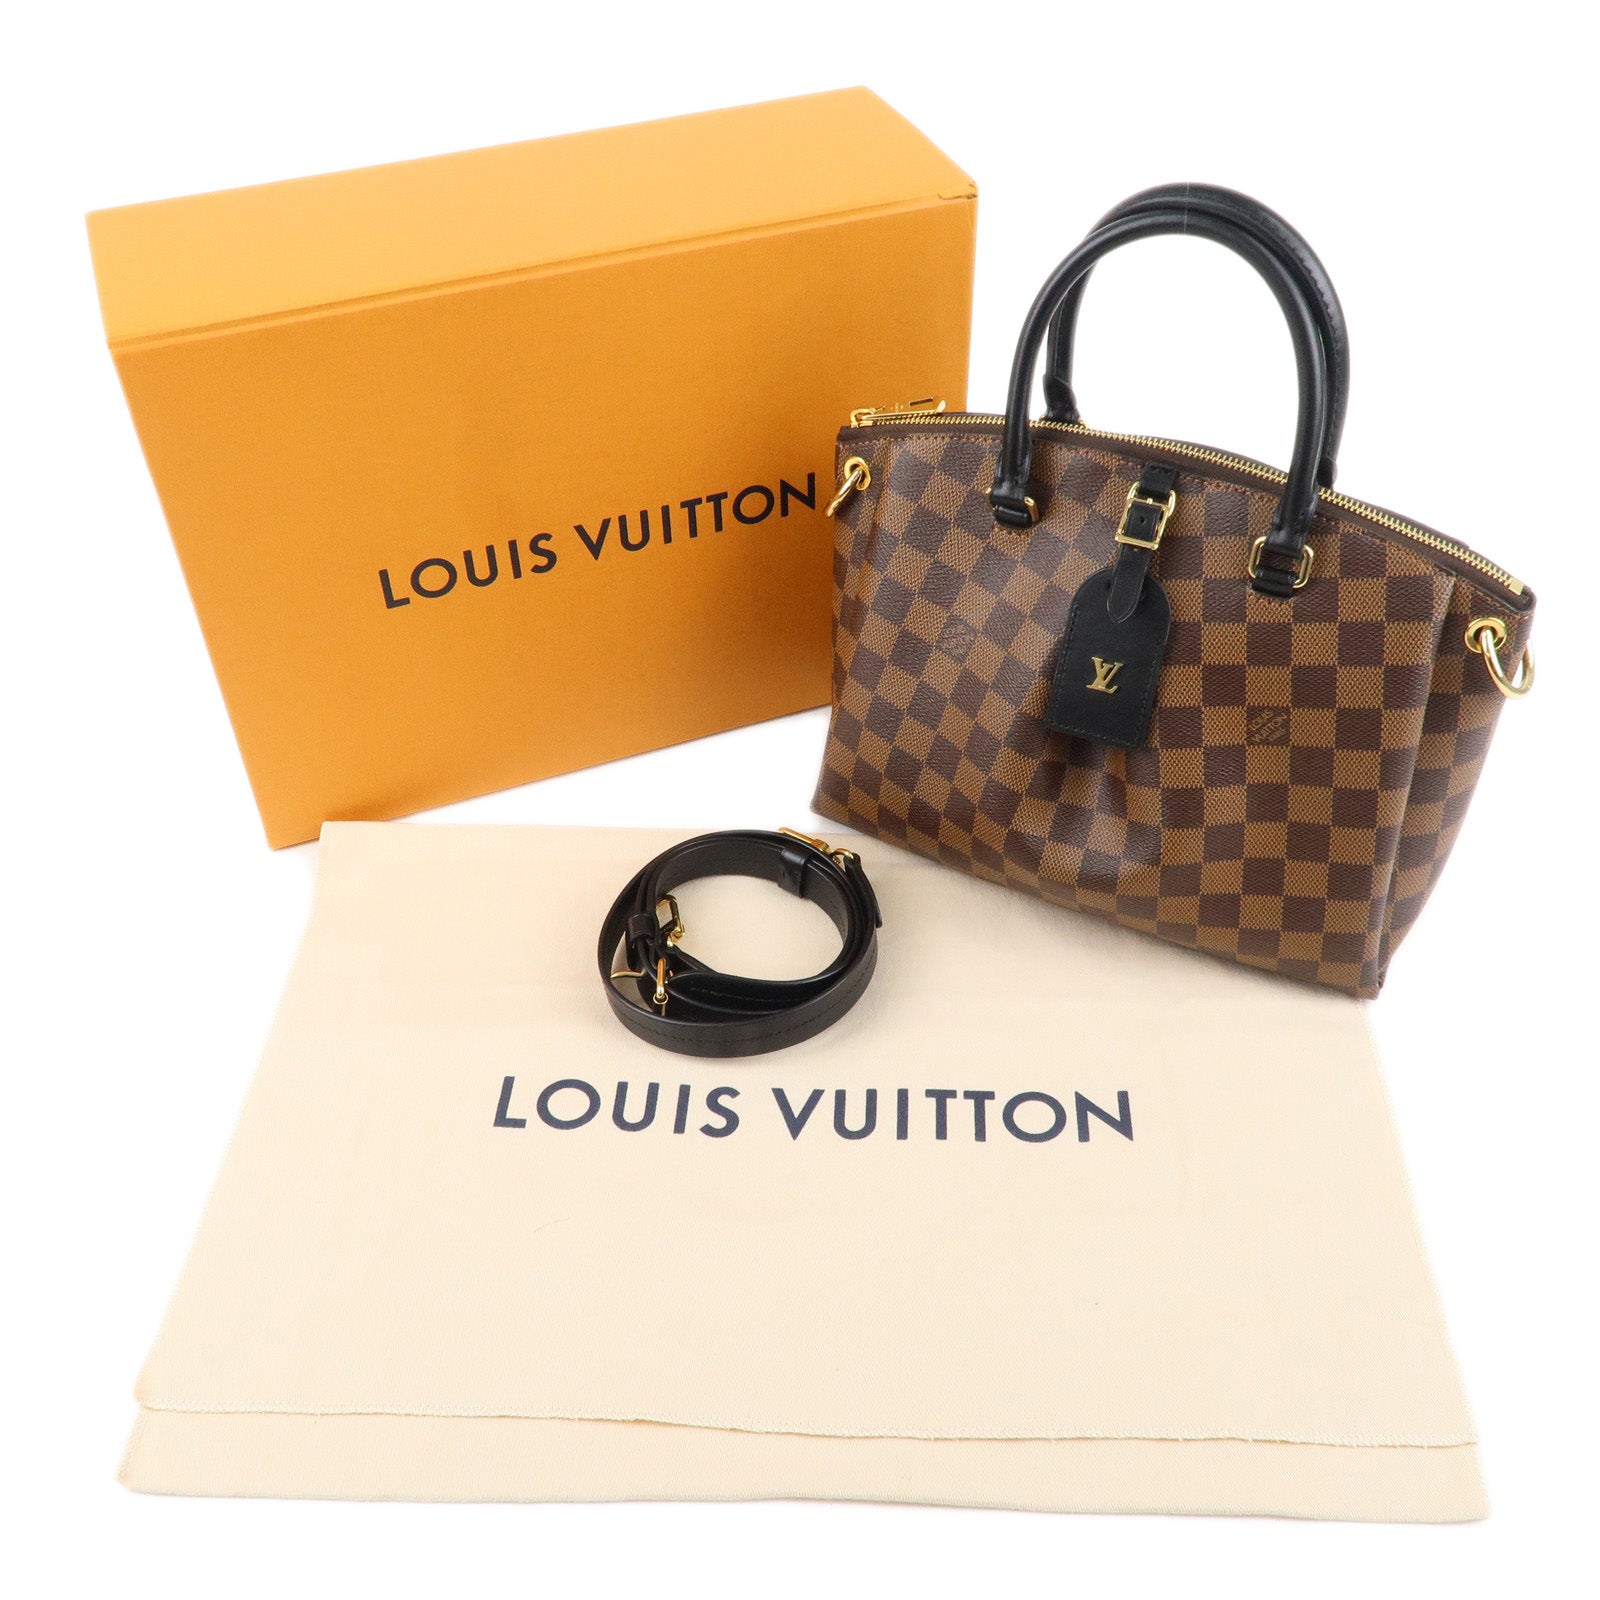 Louis Vuitton Odeon Tote Bag, Quality Issue?